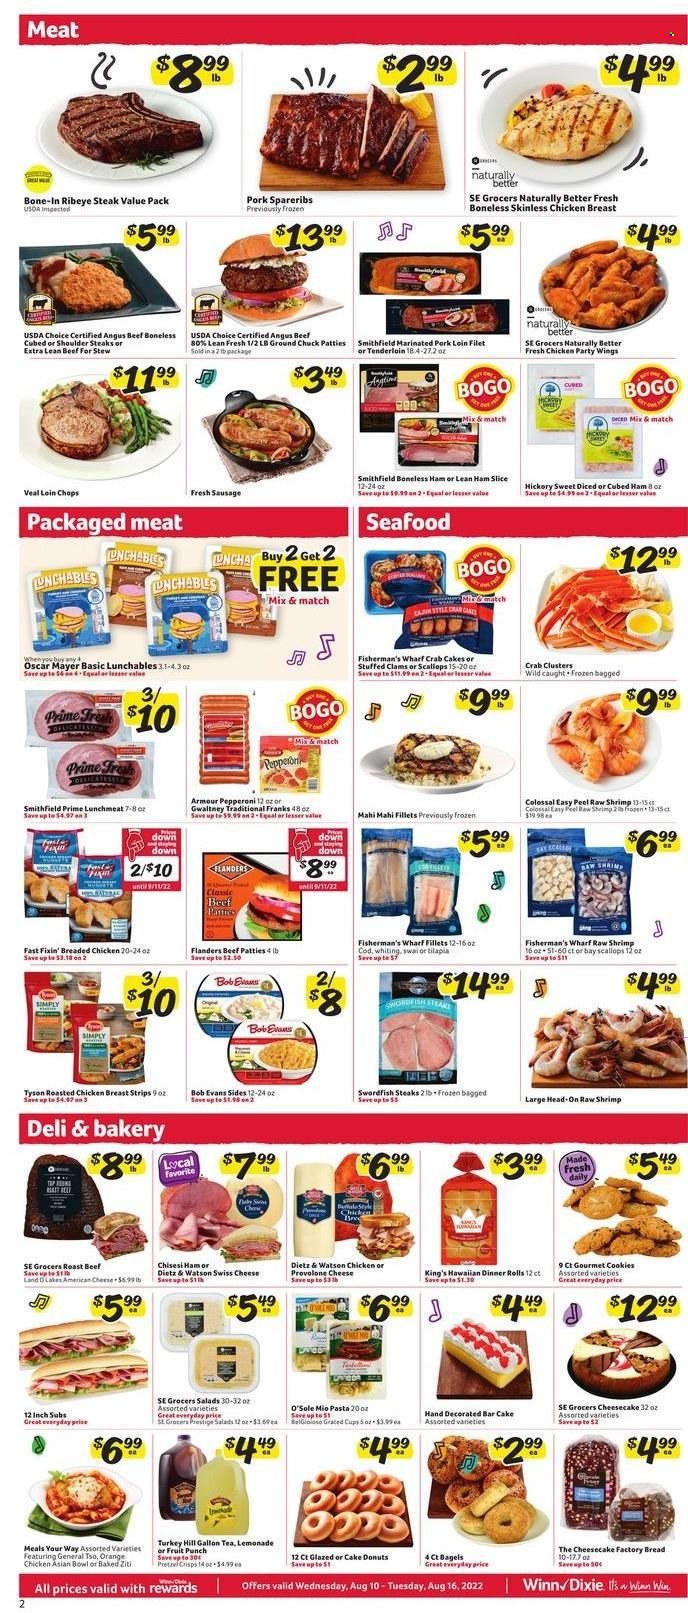 thumbnail - Winn Dixie Flyer - 08/10/2022 - 08/16/2022 - Sales products - bread, dinner rolls, donut, oranges, clams, cod, mahi mahi, scallops, swordfish, tilapia, seafood, shrimps, whiting, crab cake, chicken roast, pasta, fried chicken, baked ziti, Lunchables, Bob Evans, ham, Oscar Mayer, Dietz & Watson, sausage, pepperoni, lunch meat, american cheese, swiss cheese, cheese, Provolone, strips, cookies, lemonade, fruit punch, tea, beef meat, beef steak, ground chuck, steak, roast beef, bone-in ribeye, ribeye steak, pork loin, pork meat, pork spare ribs, marinated pork, cup, scale, bowl. Page 2.